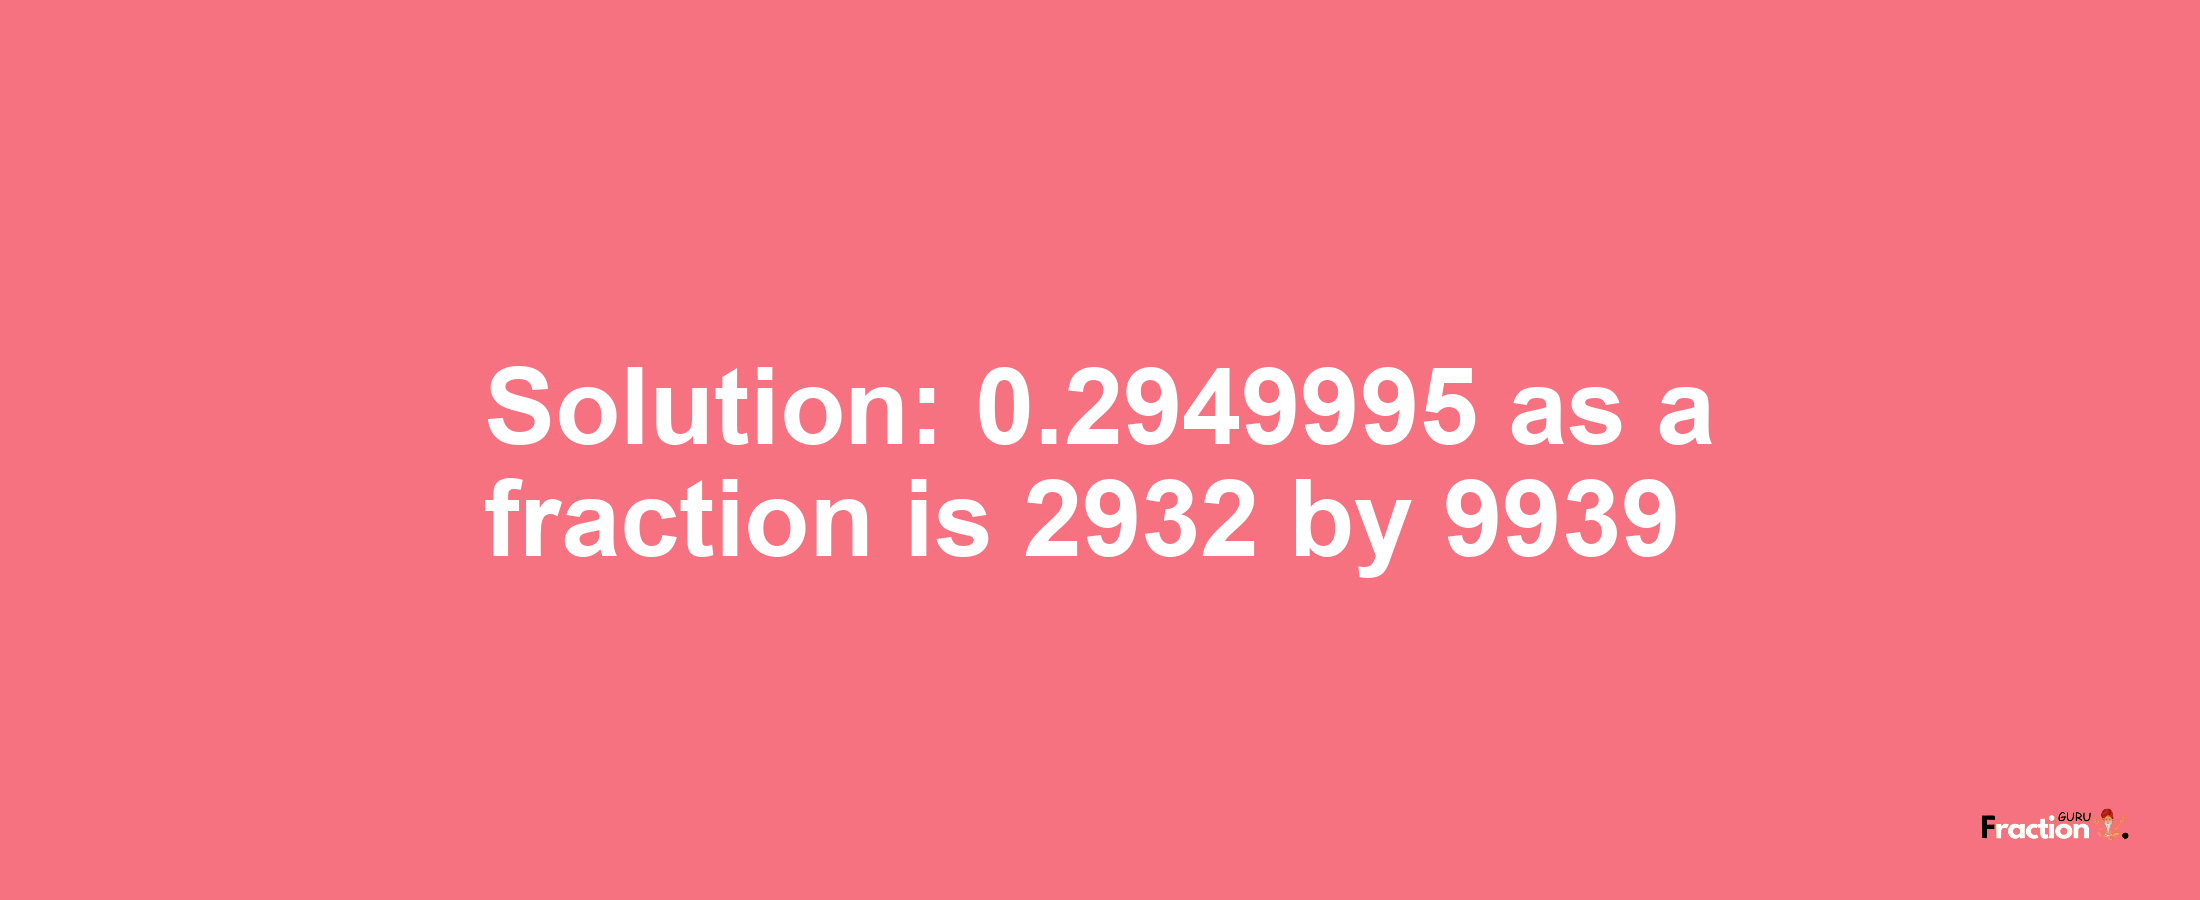 Solution:0.2949995 as a fraction is 2932/9939